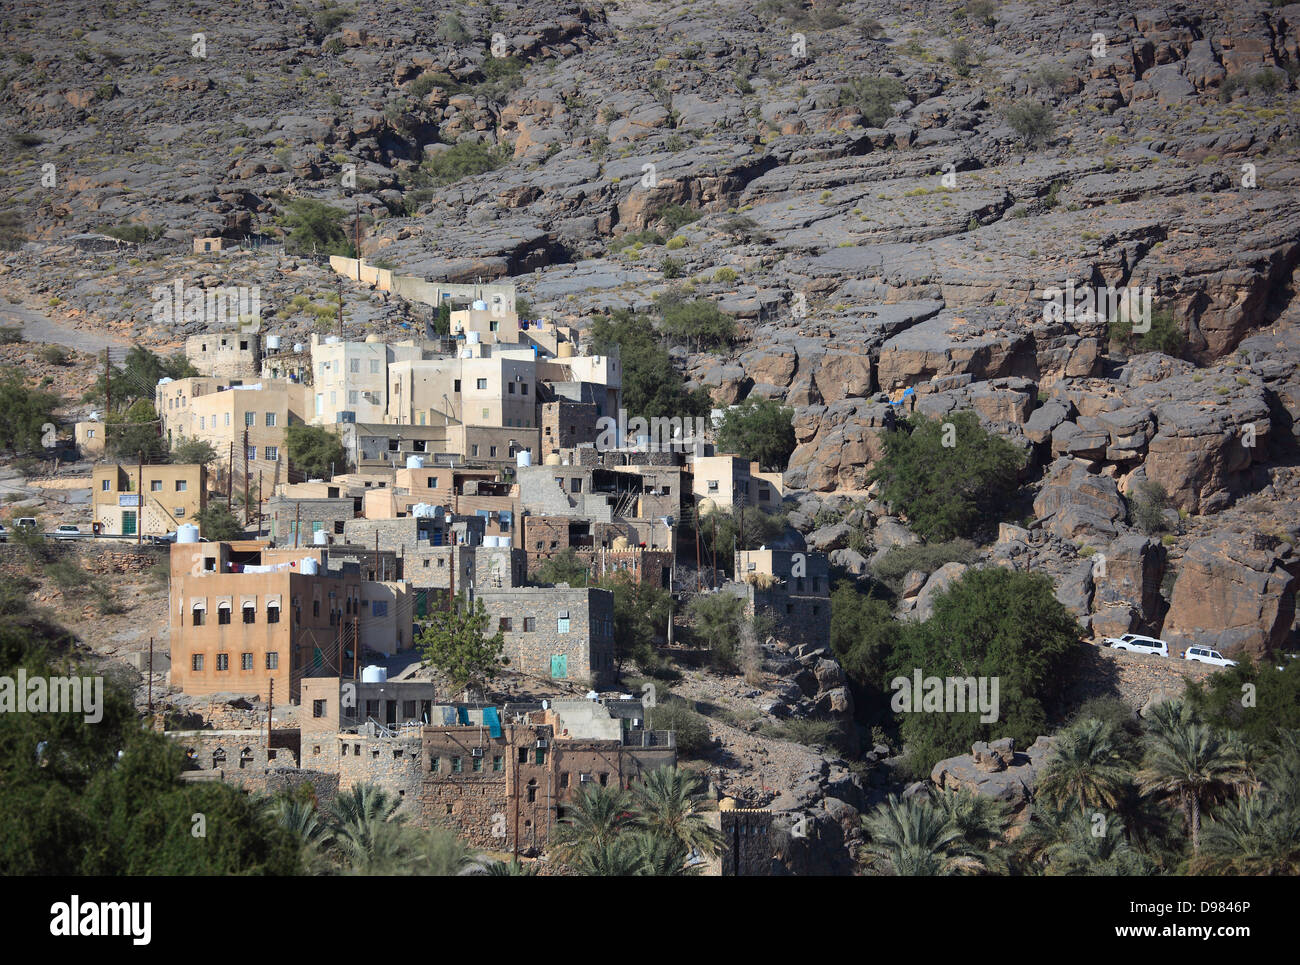 Al-Hamra is one of many interesting oases with an old mucky part with red houses on stone foundations. Here the district of Misf Stock Photo